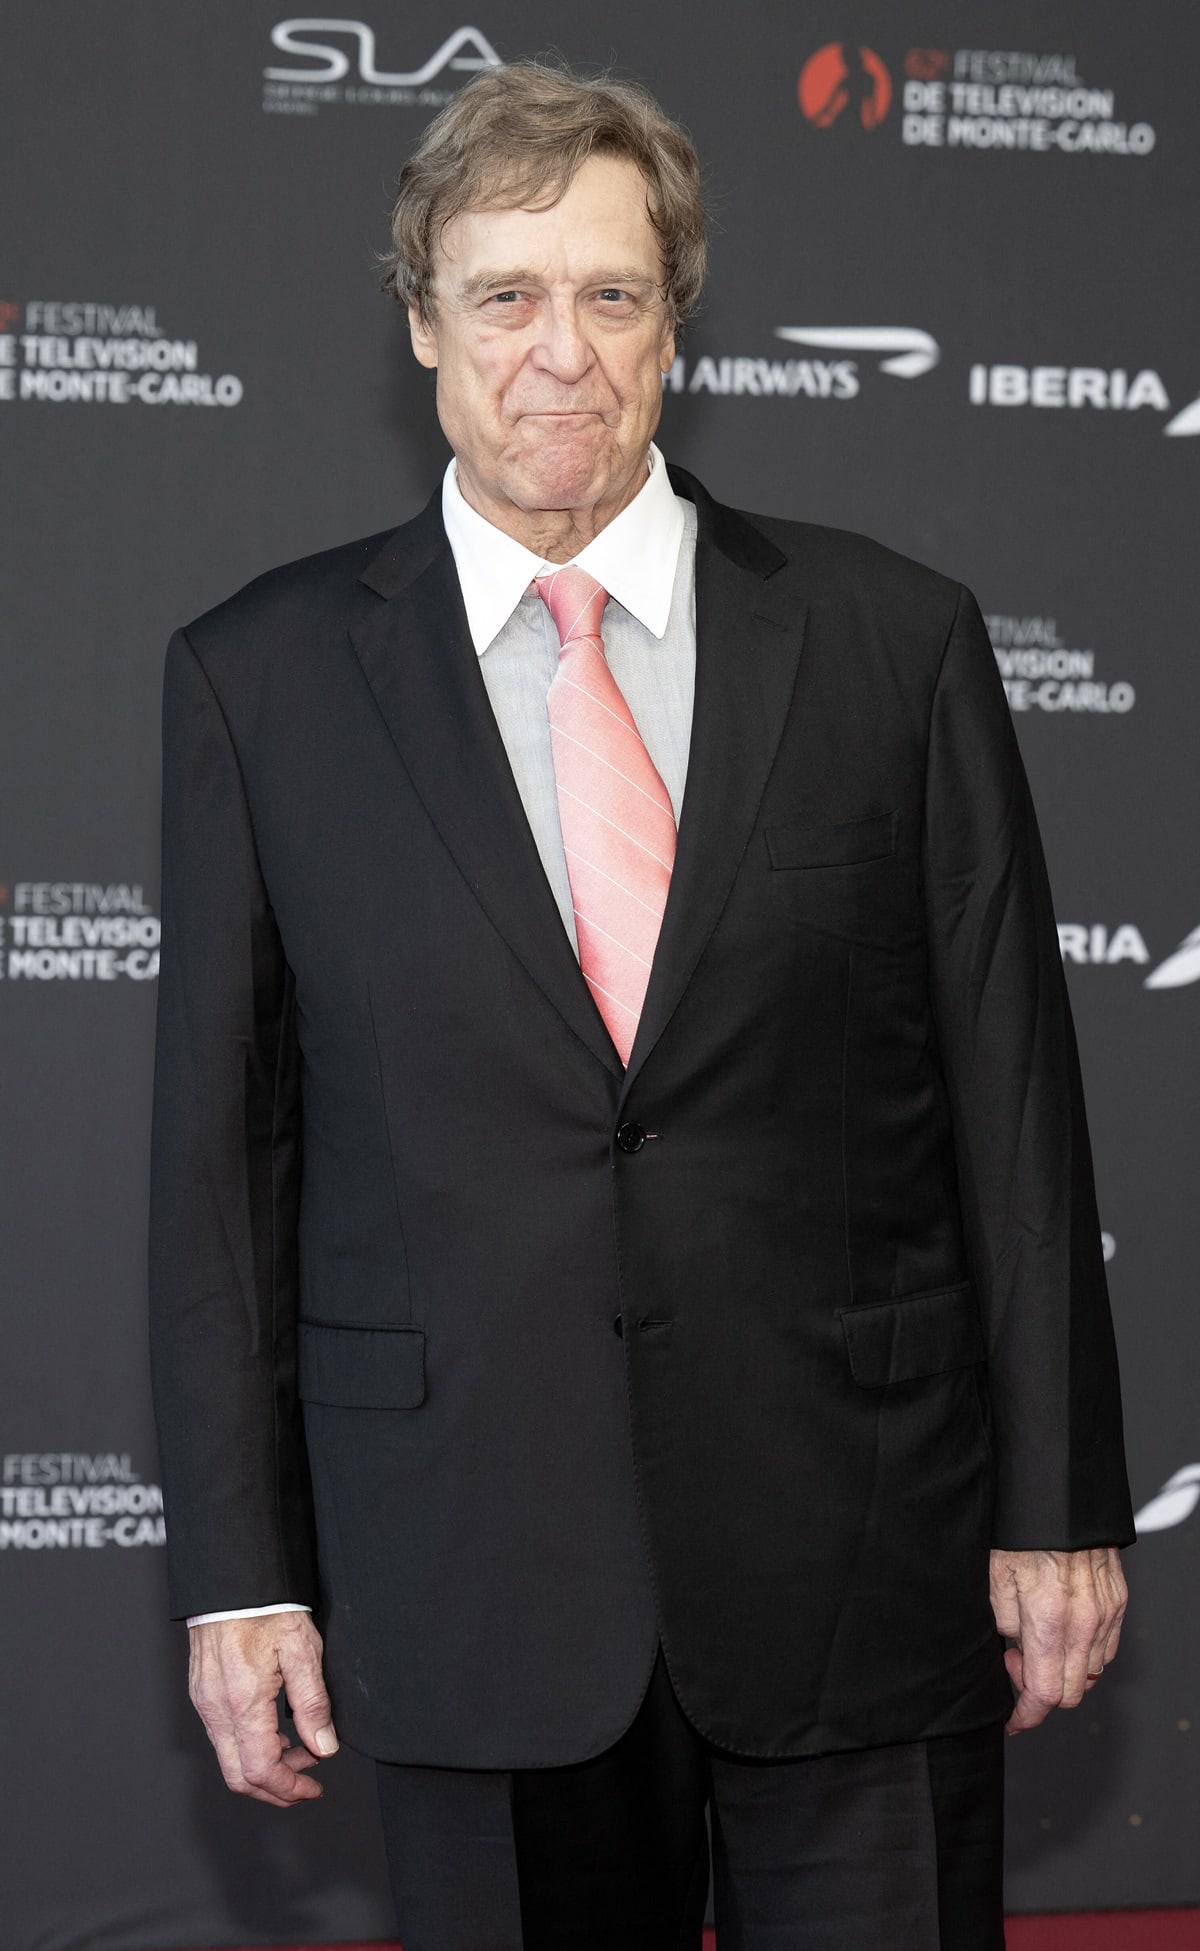 John Goodman displayed his impressive weight loss at the Monte-Carlo Television Festival in Monaco, where he served as jury president